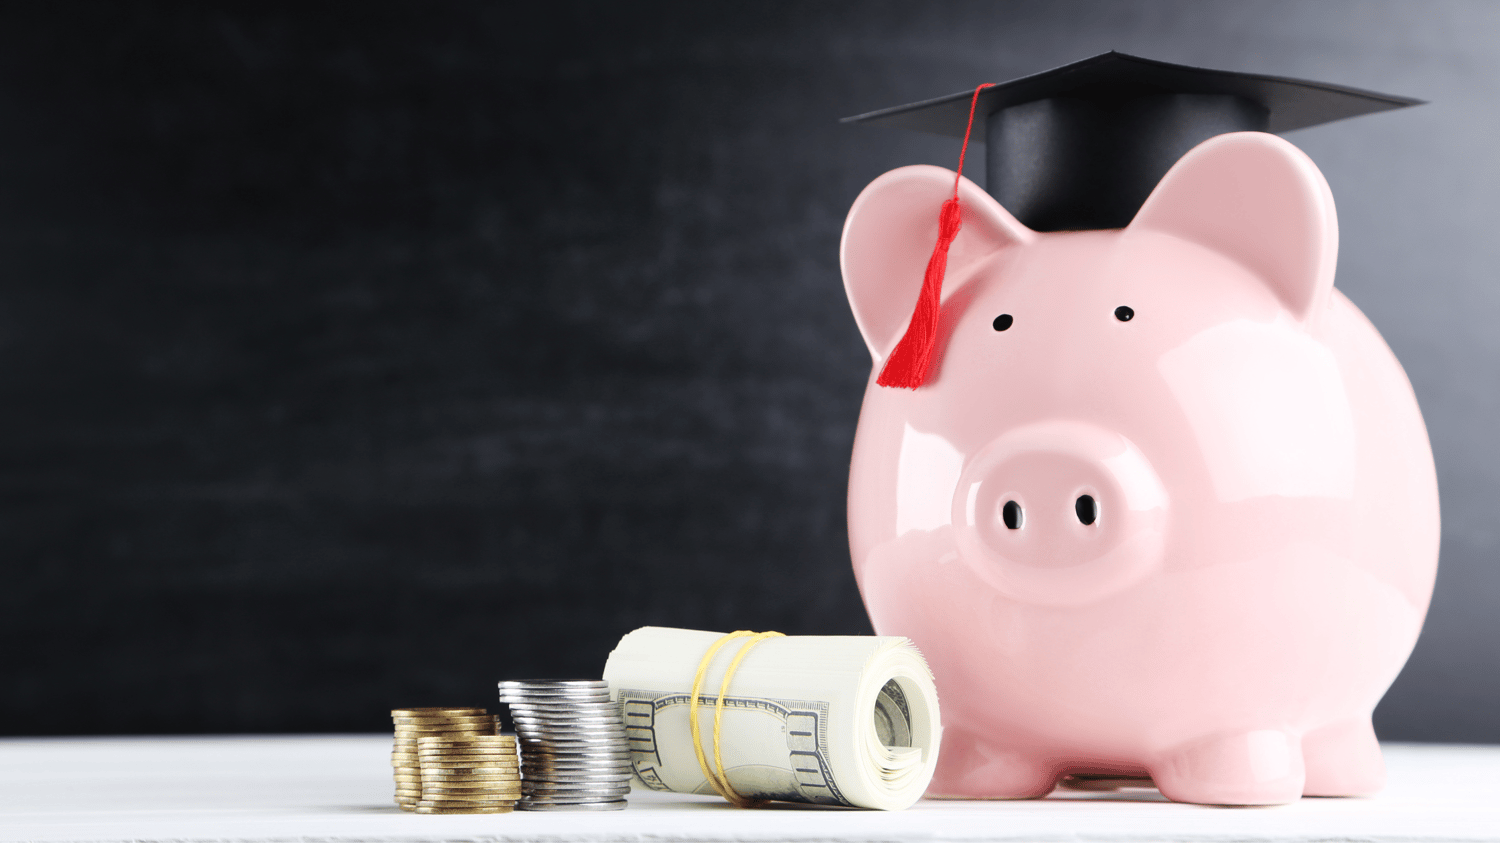 THE PERFECT FINANCIAL GIFTS FOR RECENT GRADUATES